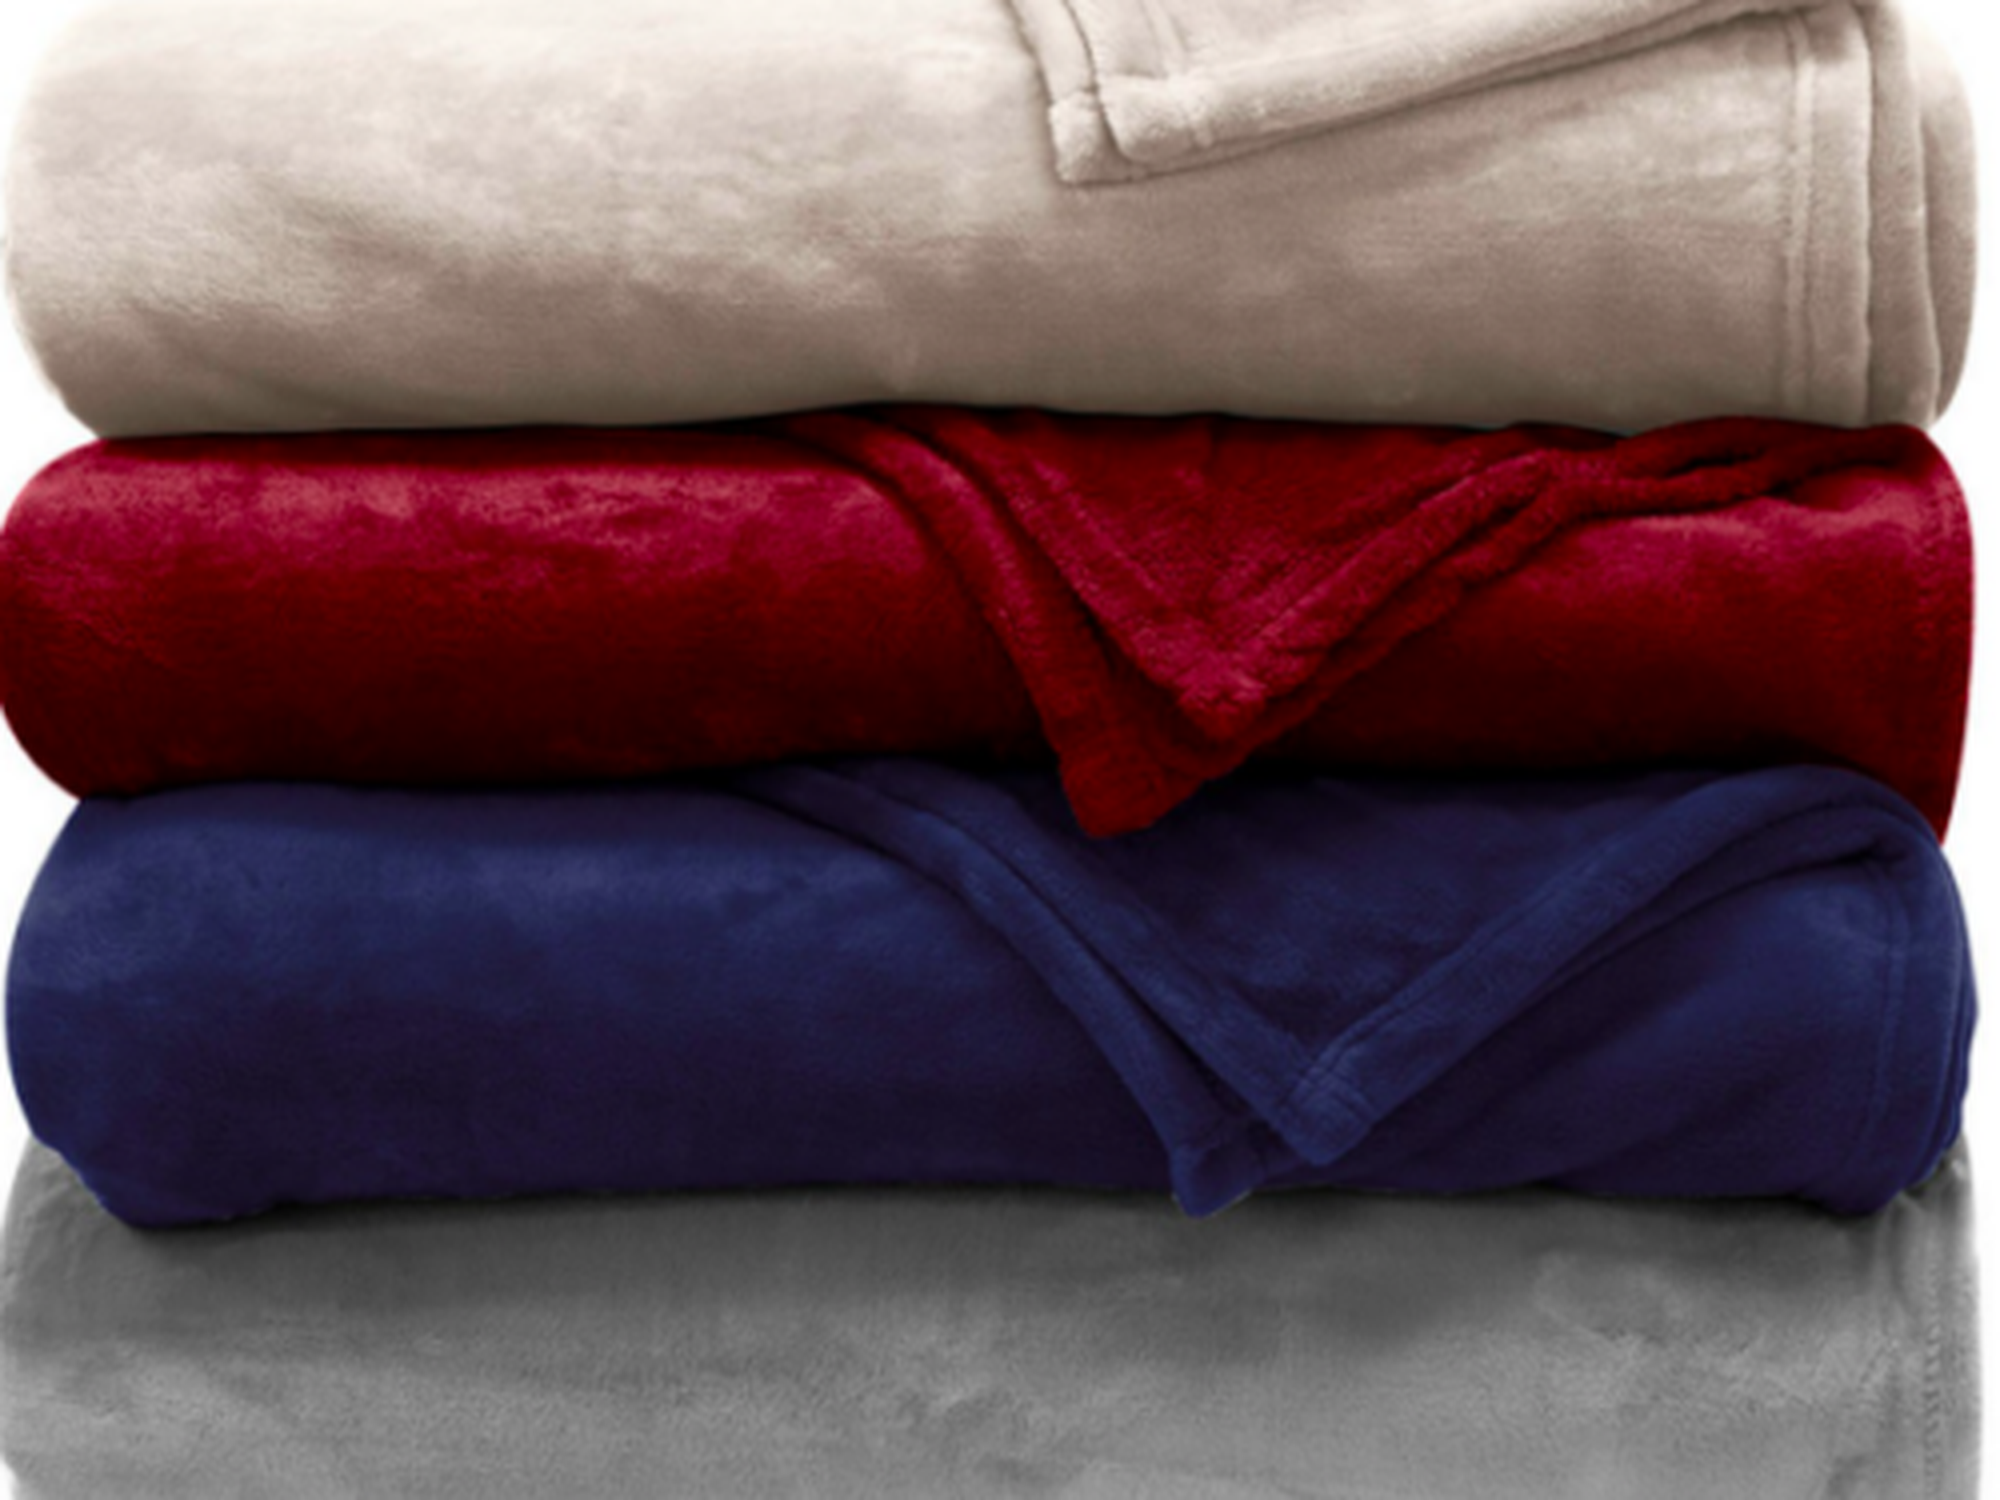 Luxurious Winter Blankets by Matanah Furniture – Cozy, Stylish, and Durable for Homes and Businesses in Riyadh